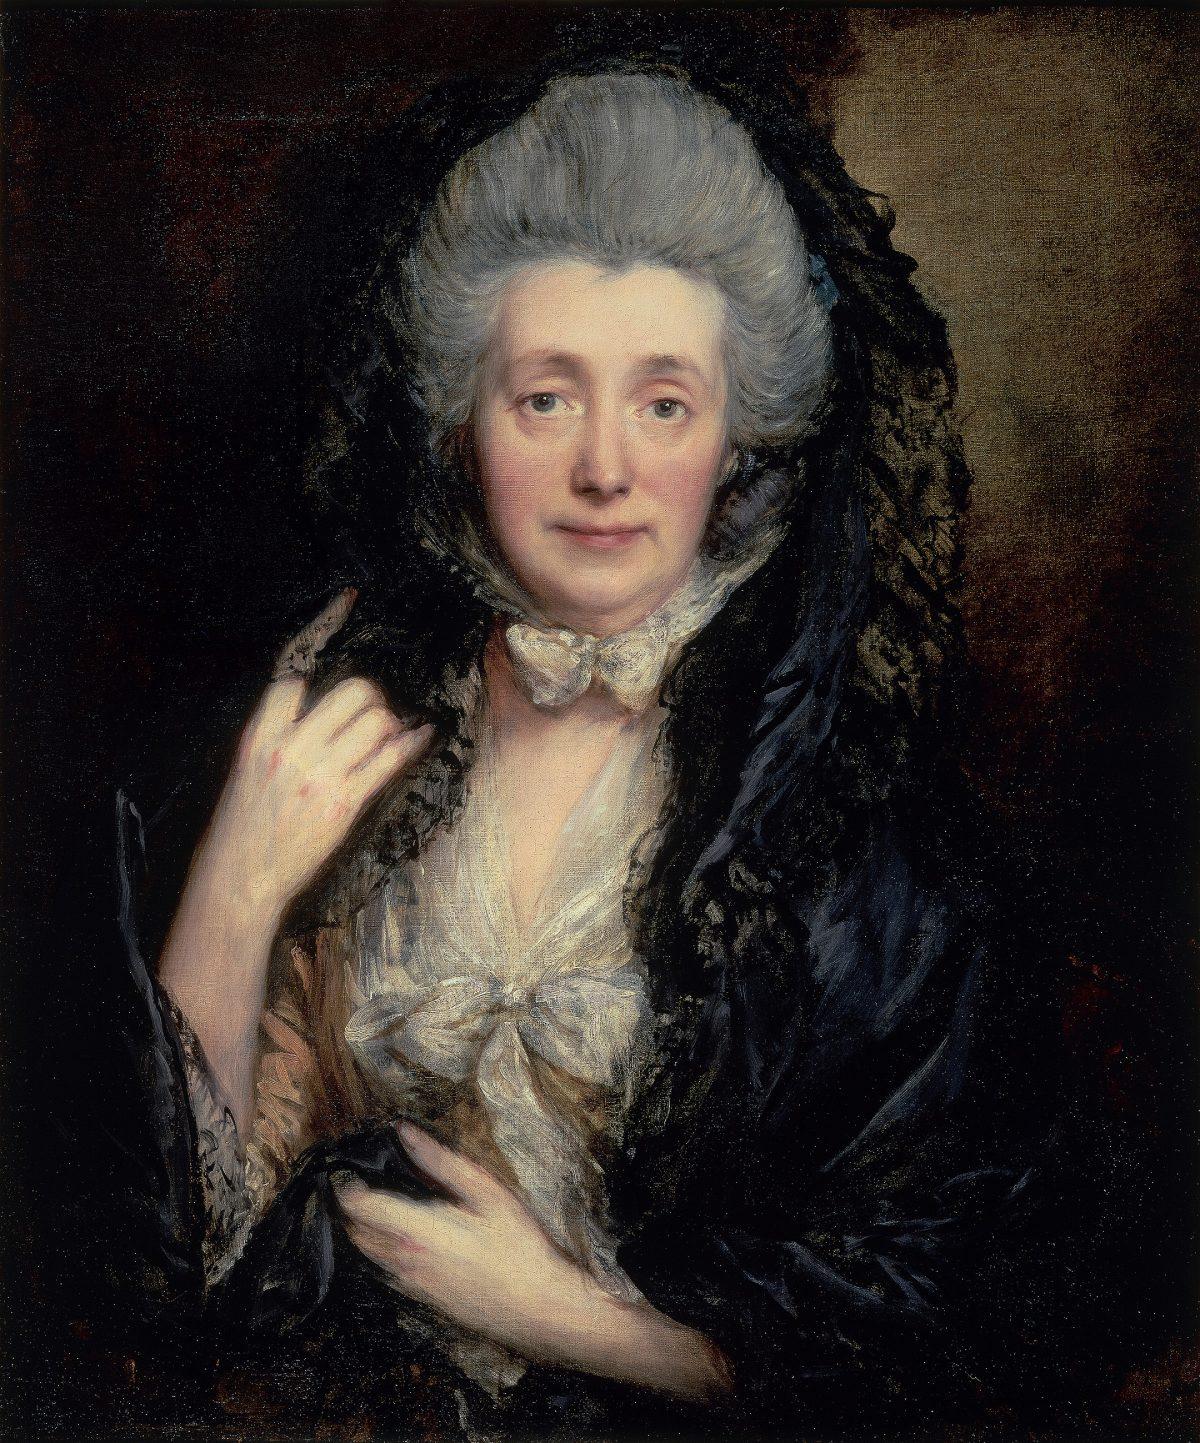 "Margaret Gainsborough, the Artist’s Wife," circa 1777, by Thomas Gainsborough. Oil on canvas. The Samuel Courtauld Trust. (The Courtauld Gallery, London)